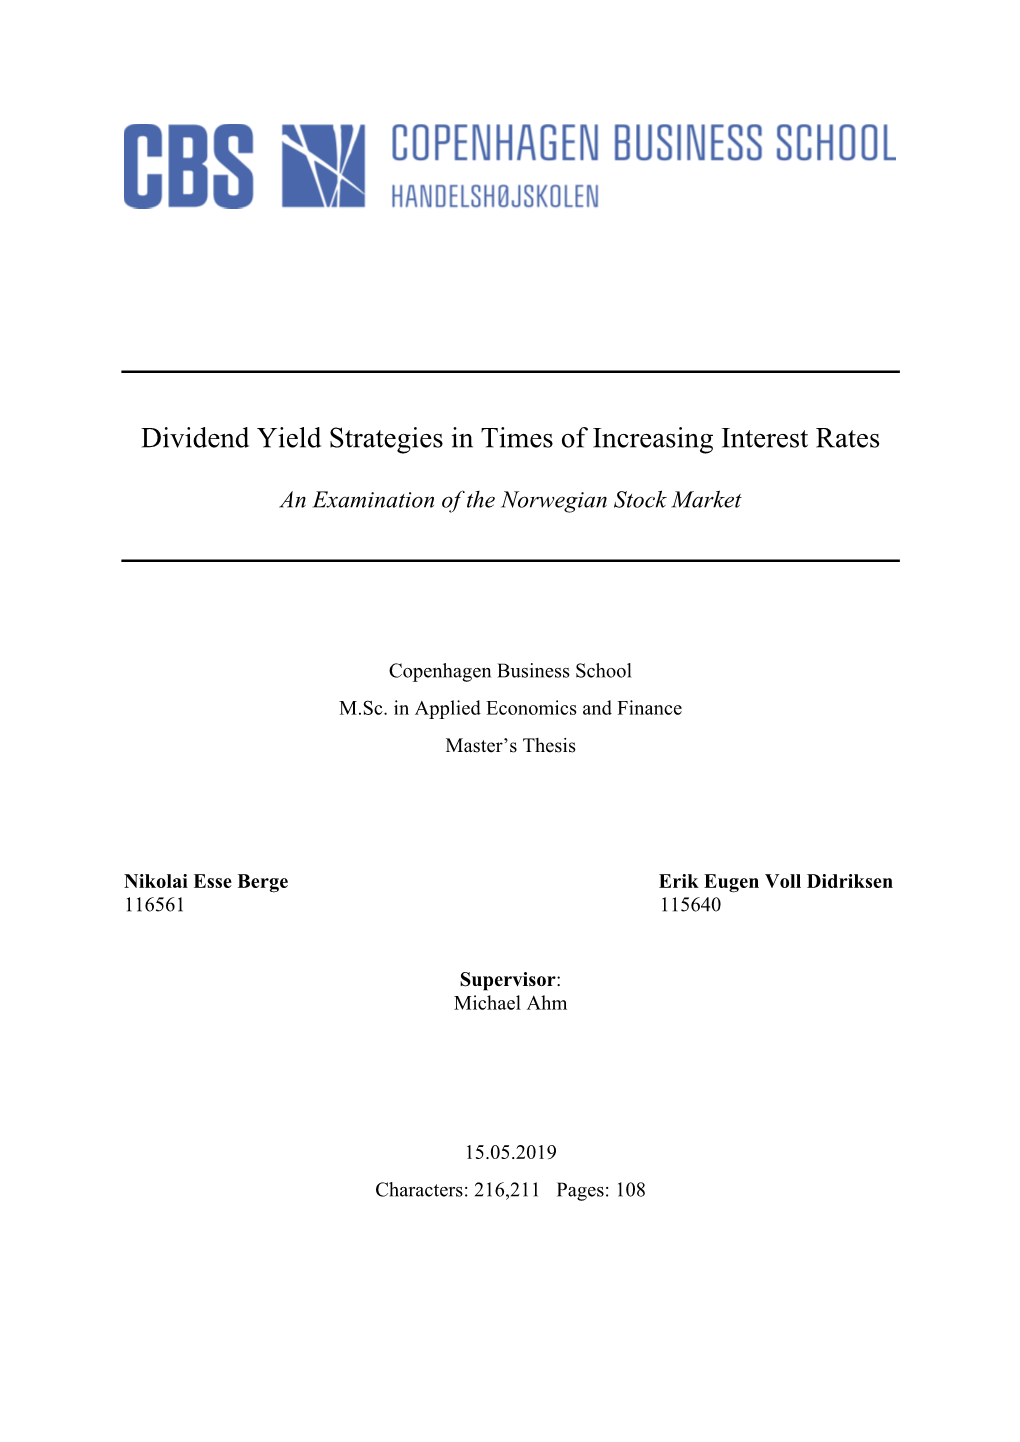 Dividend Yield Strategies in Times of Increasing Interest Rates